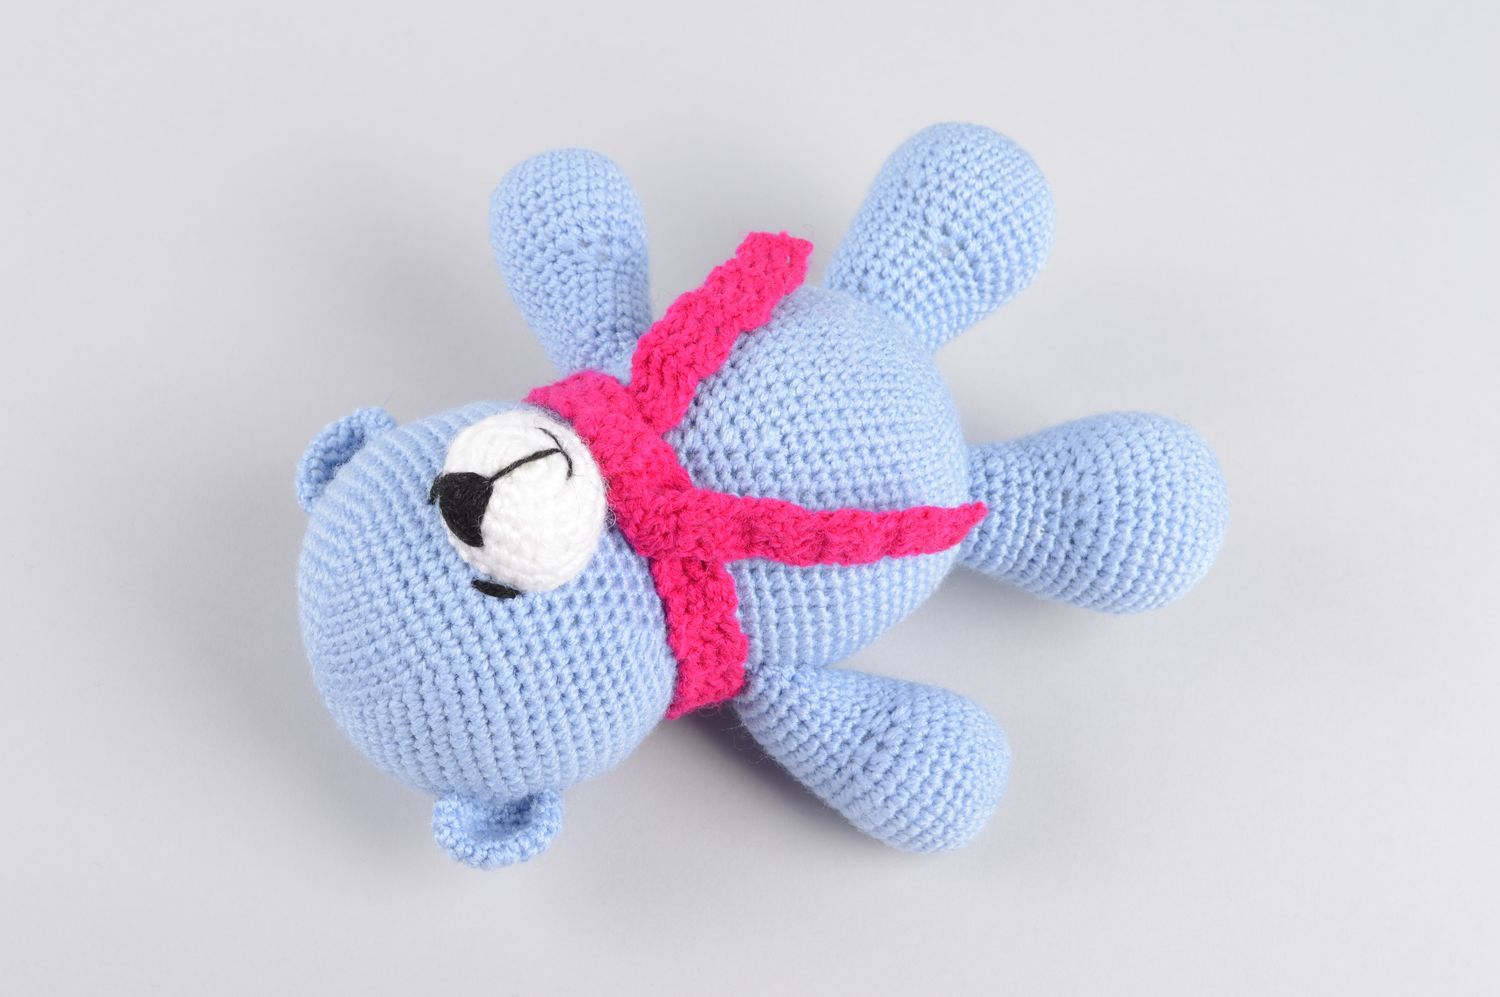 Stylish handmade soft toy cute childrens toys crochet toy for kids gift ideas photo 2